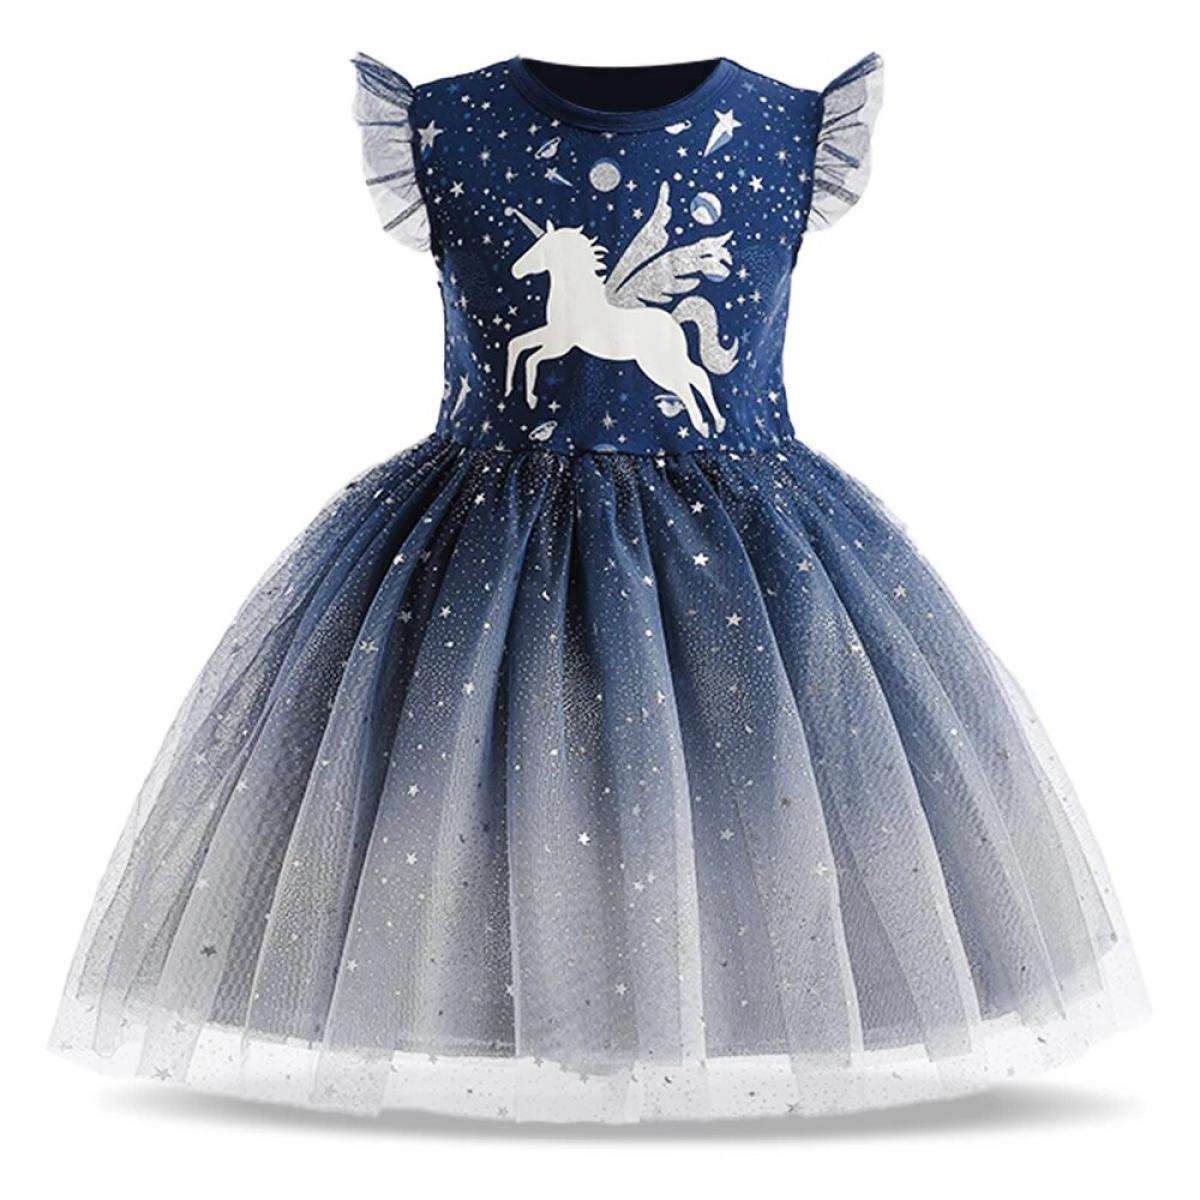 Elegnt Girl Summer Party Princess Dress Kids Star Horse Evening Costume Baby Birthday Cake Tulle Clothes Vestidos Casual